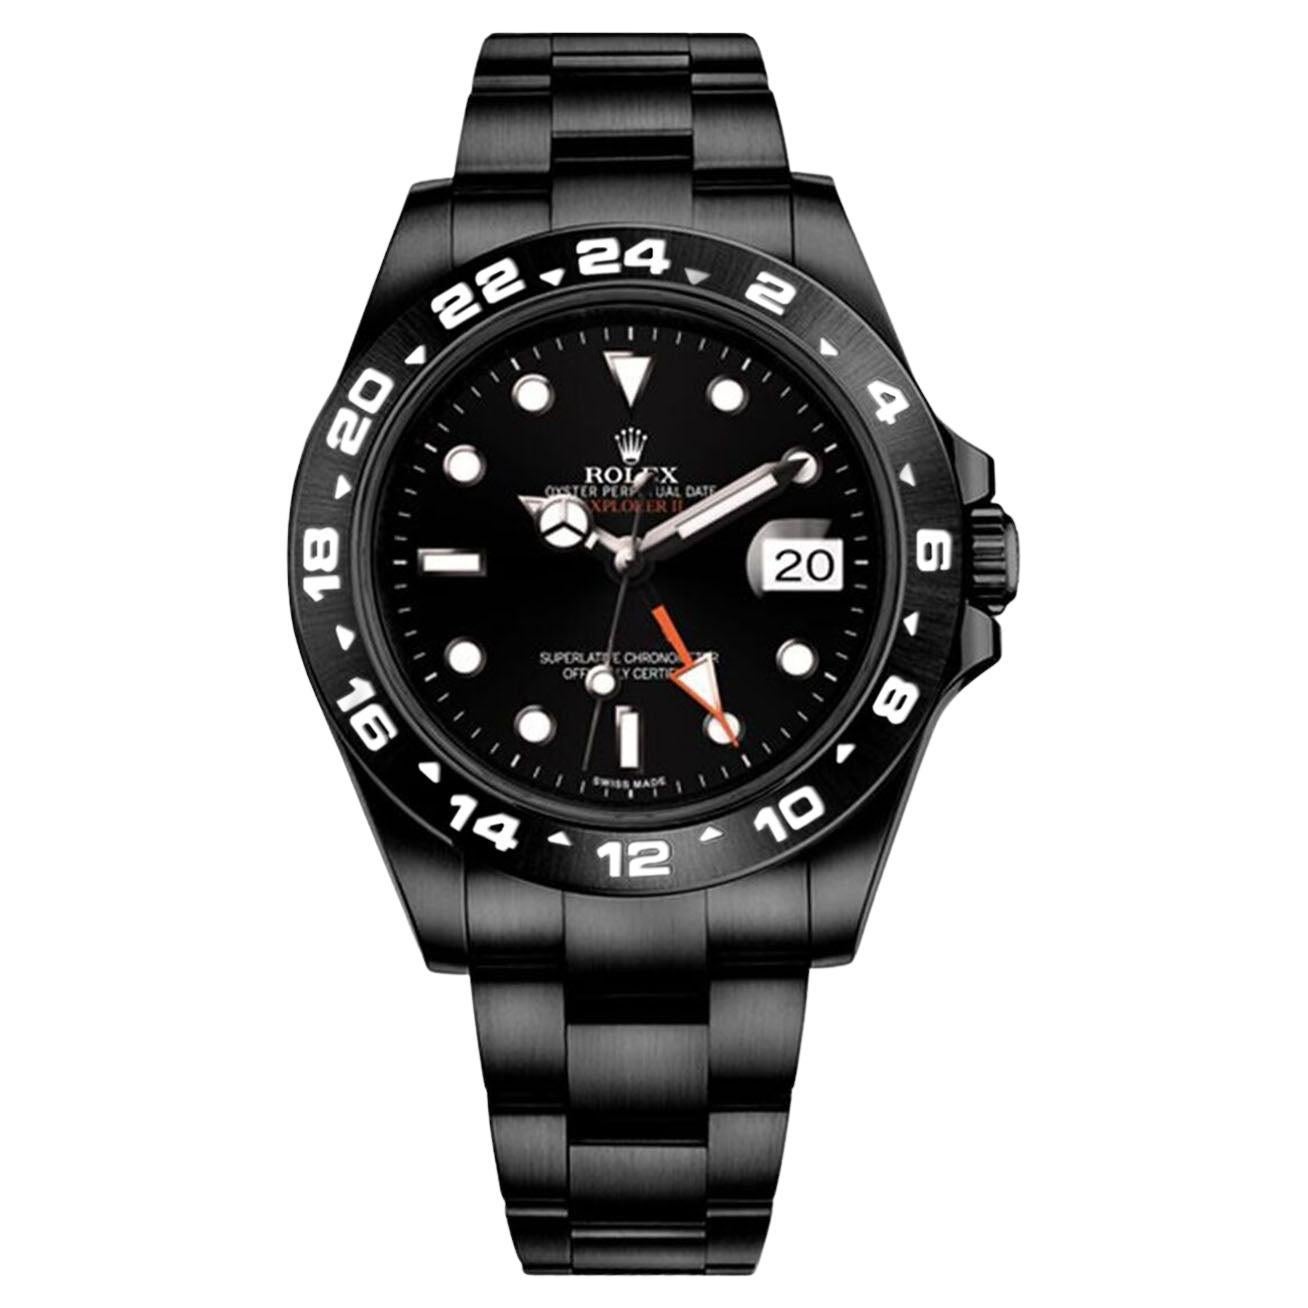 Rolex Explorer II Black PVD/DLC Coated Stainless Steel Watch For Sale